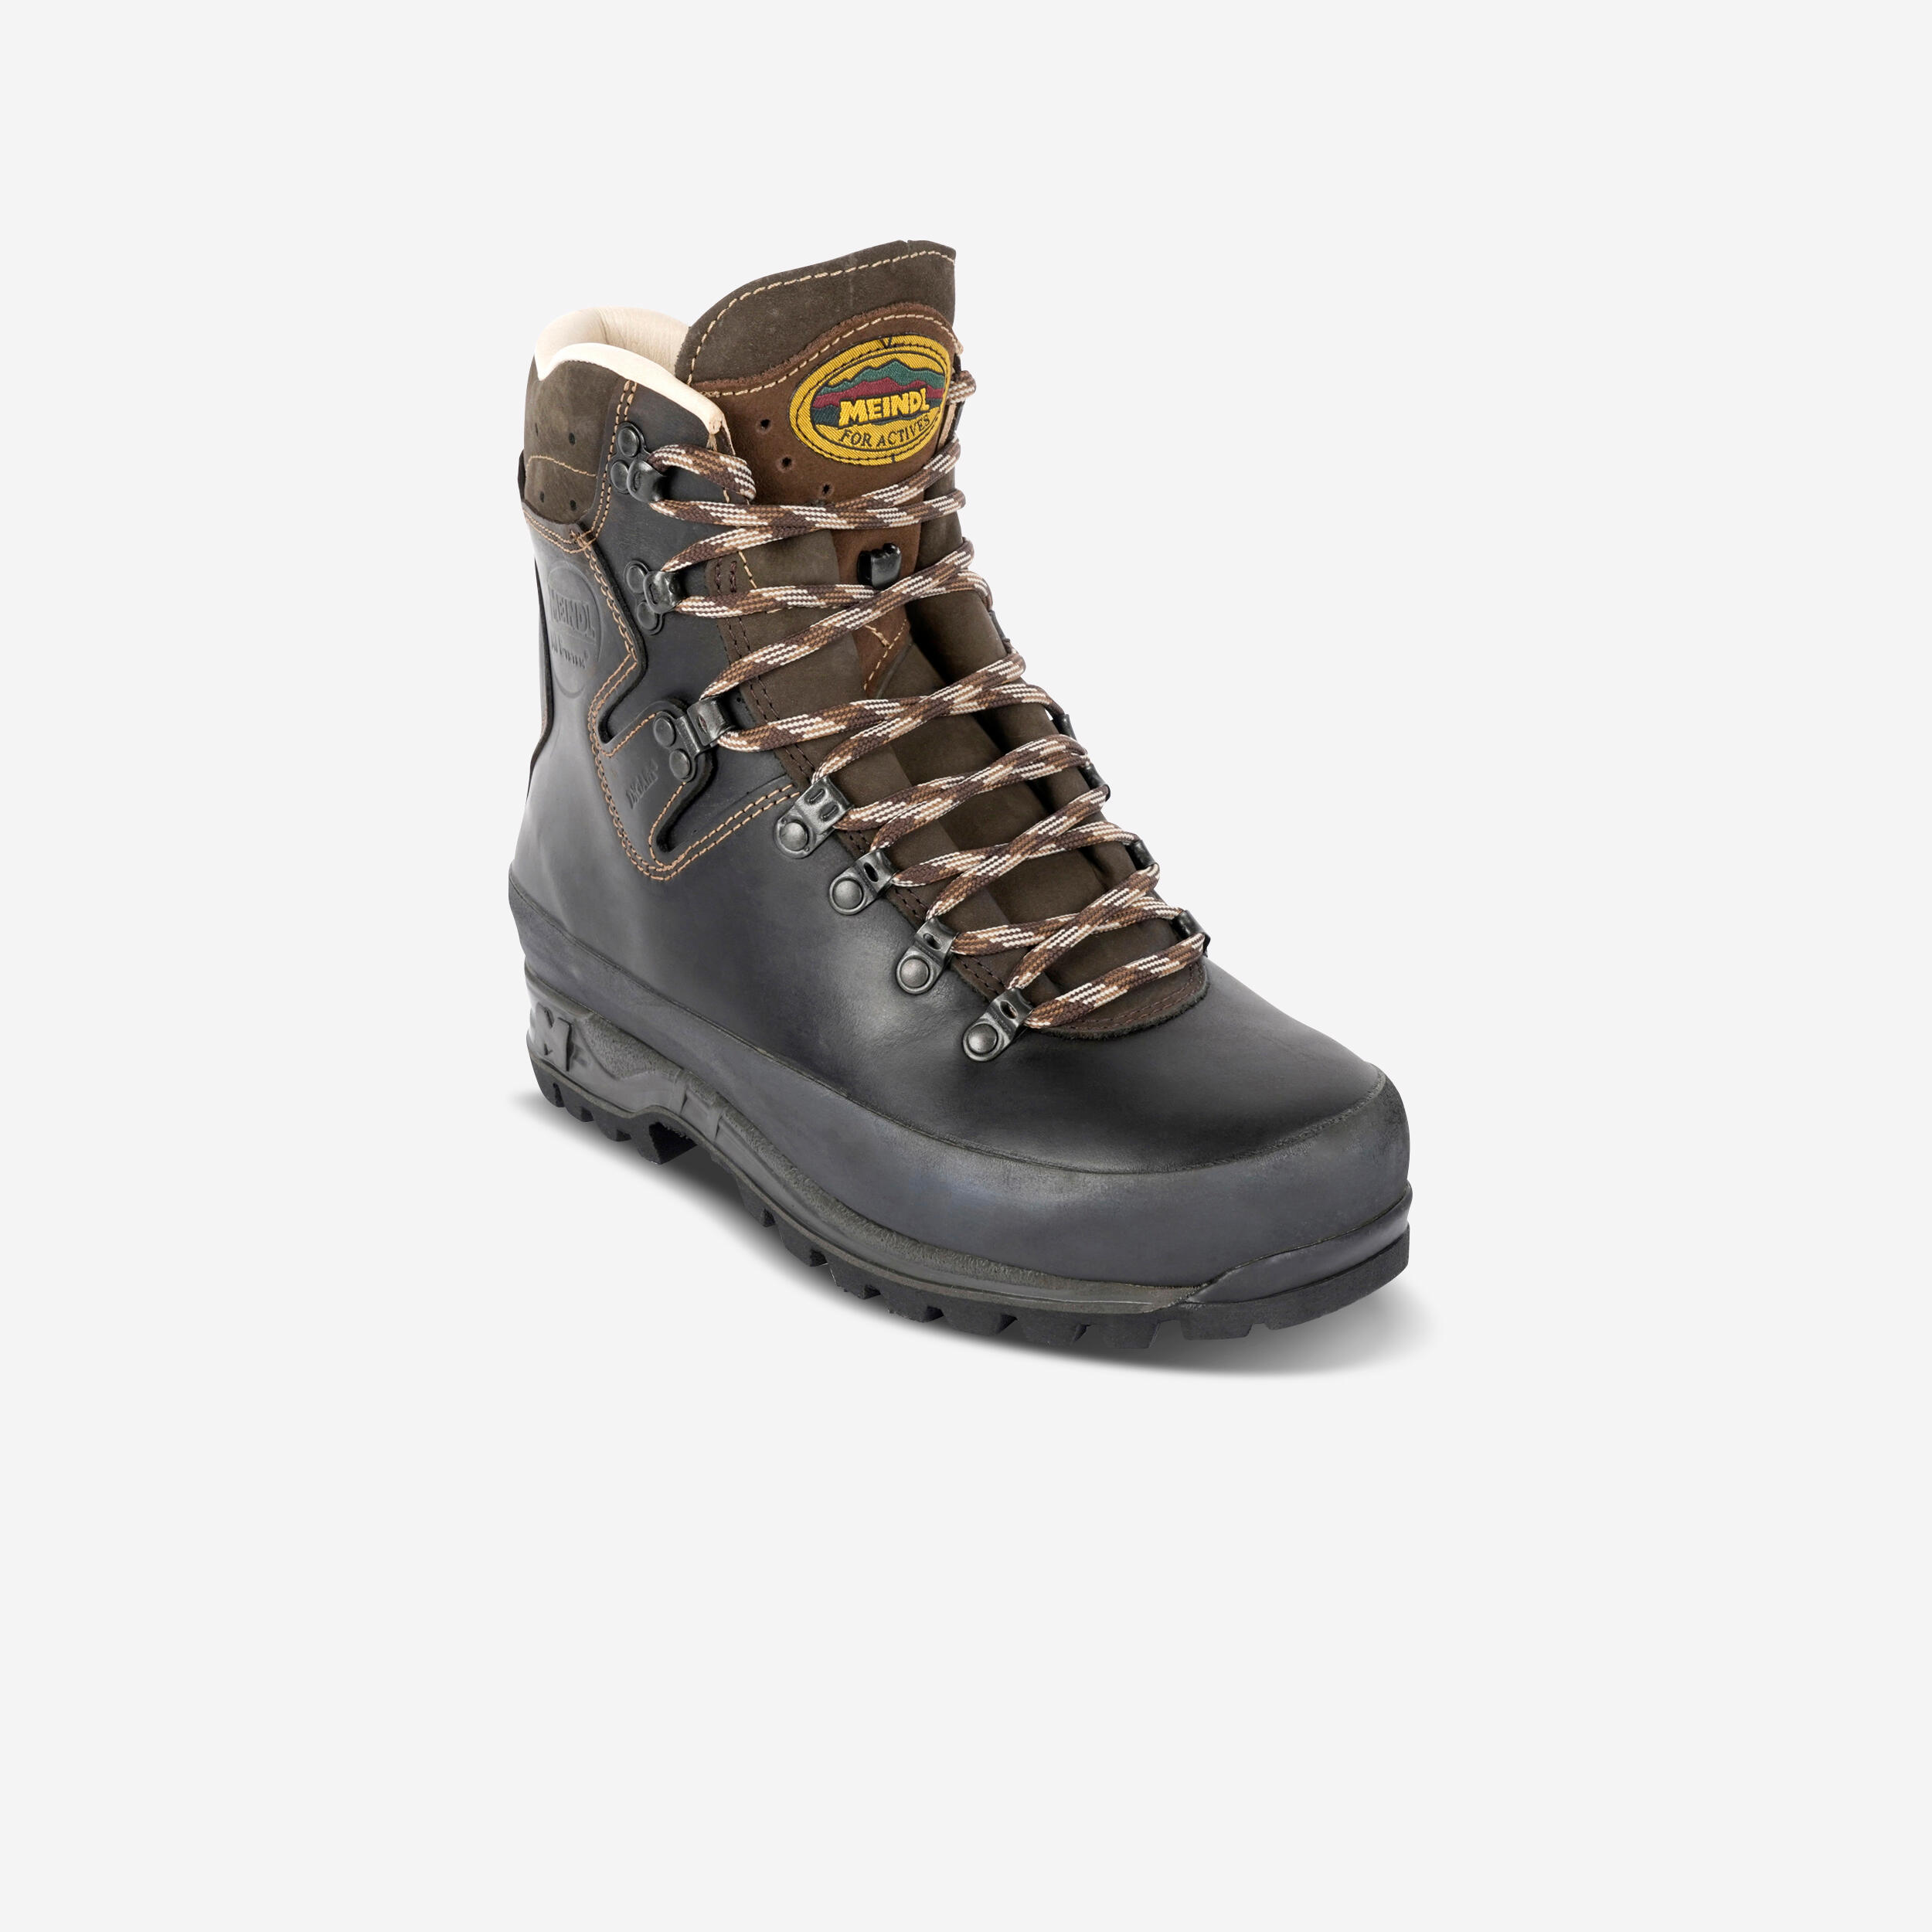 Meindl Engadin MFS hunting boots MEINDL 